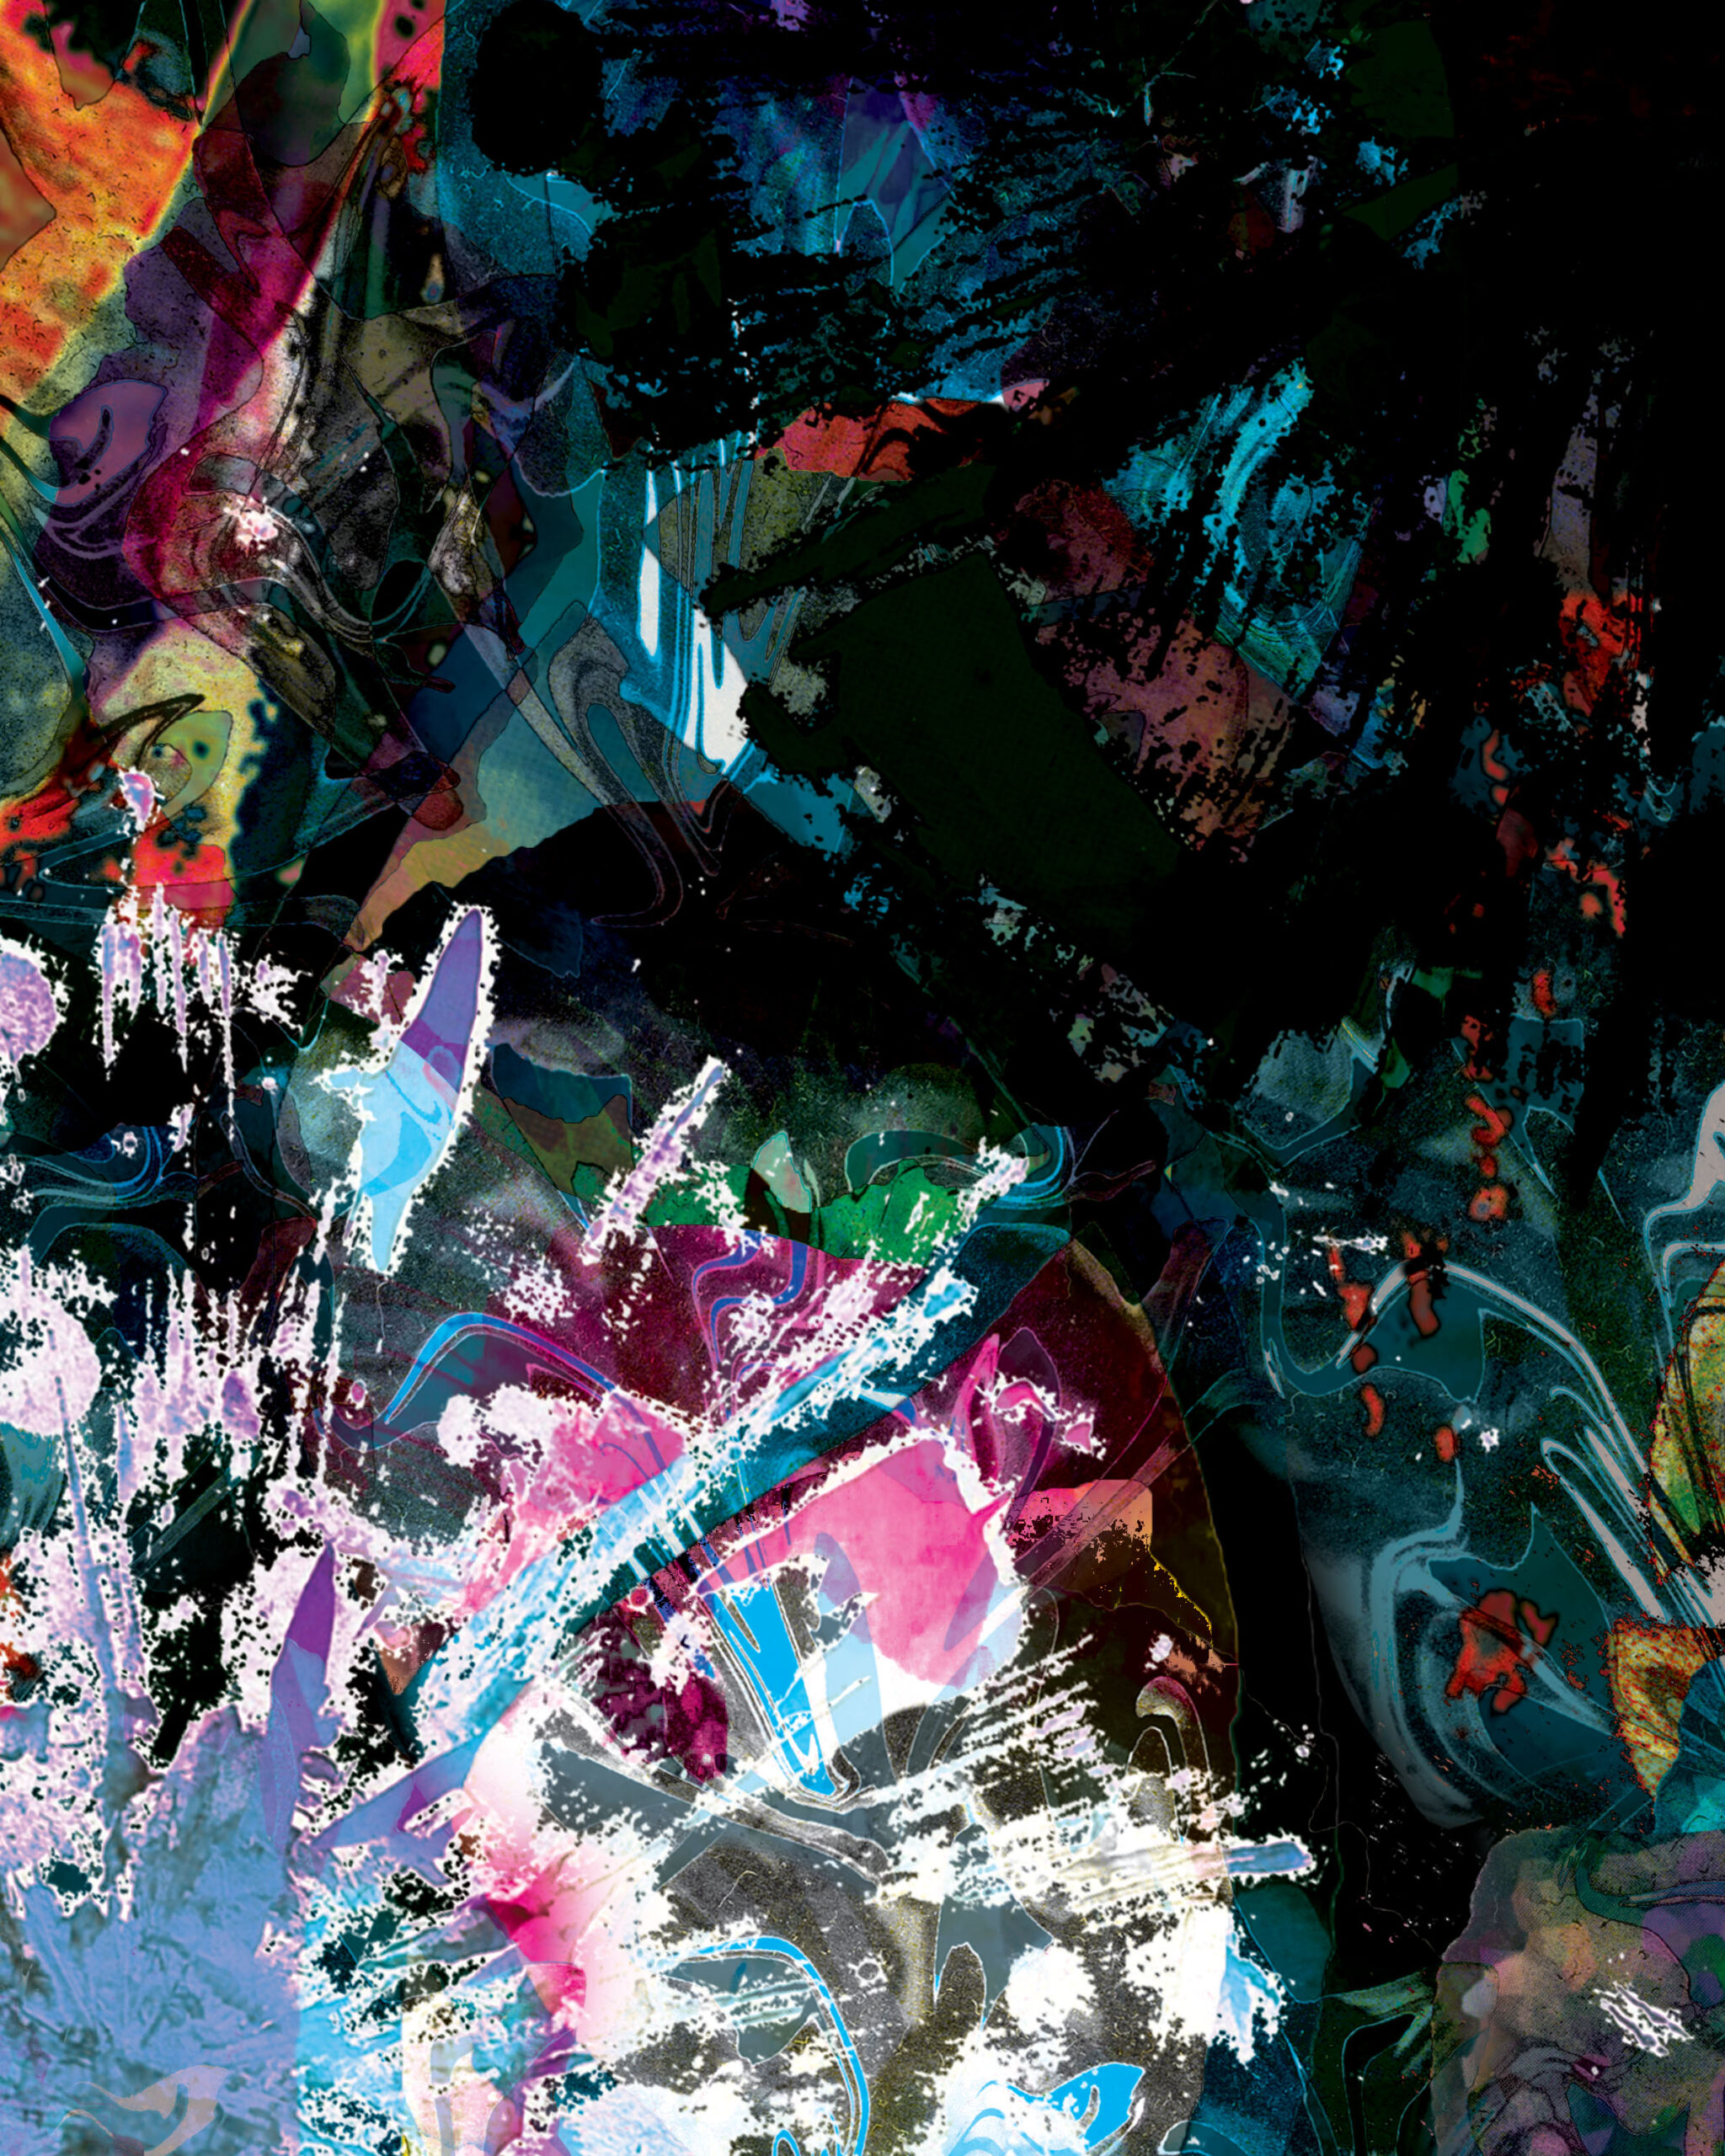 A layered digital art piece with blues, pinks, greens, and other colors.